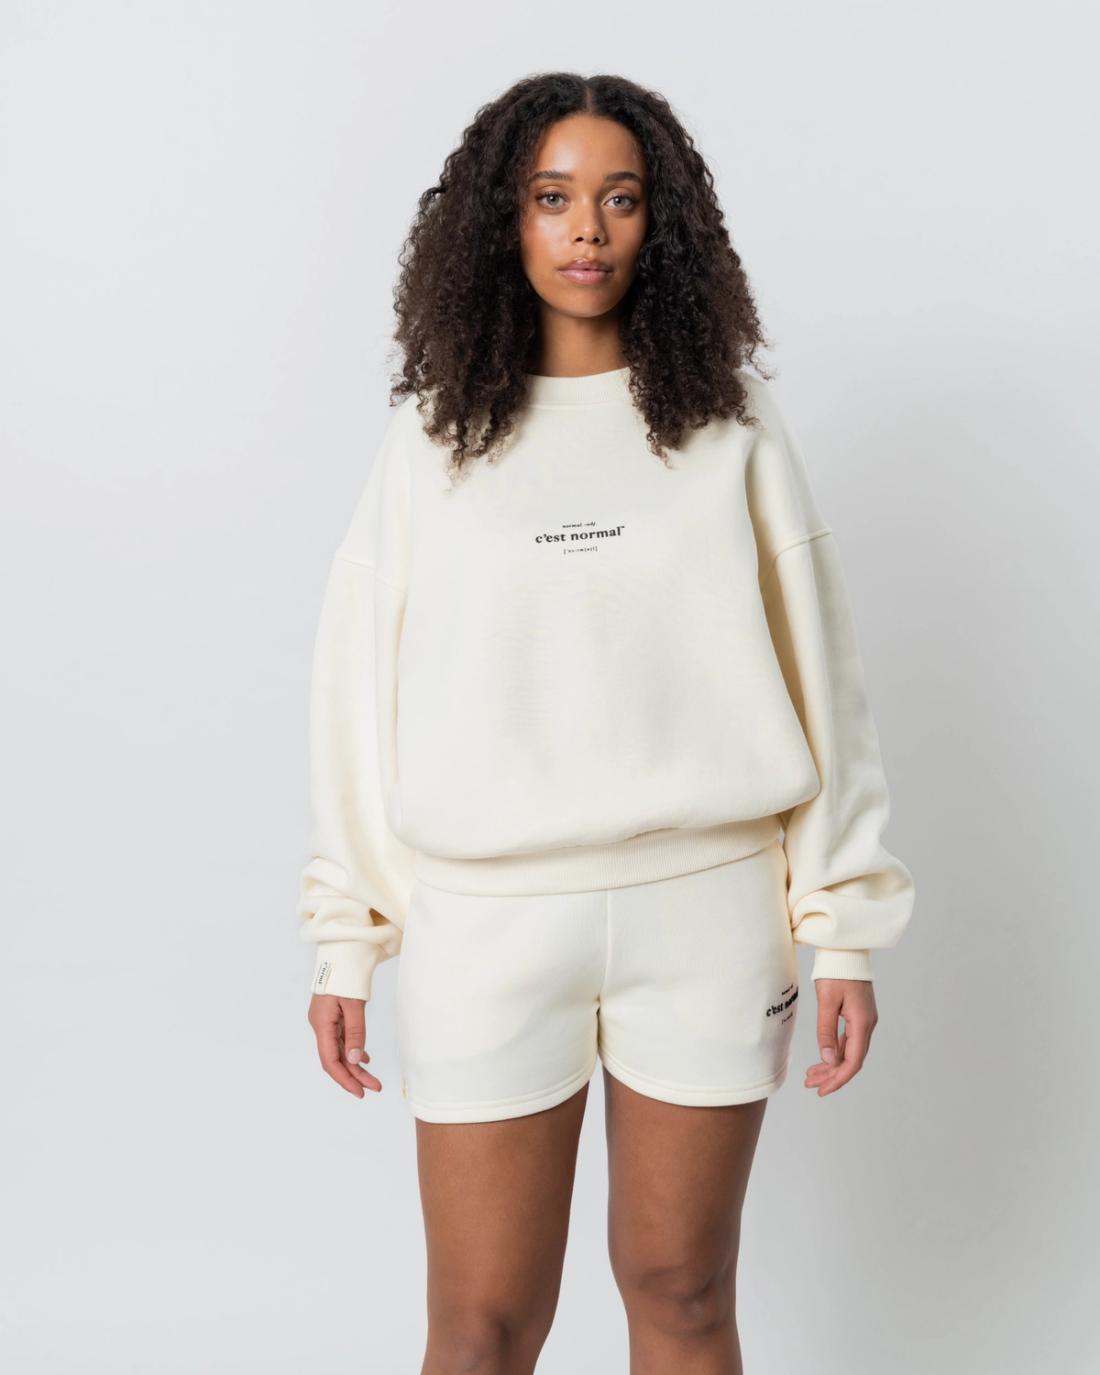 The Basic Sweater | c'est normal - Around here.